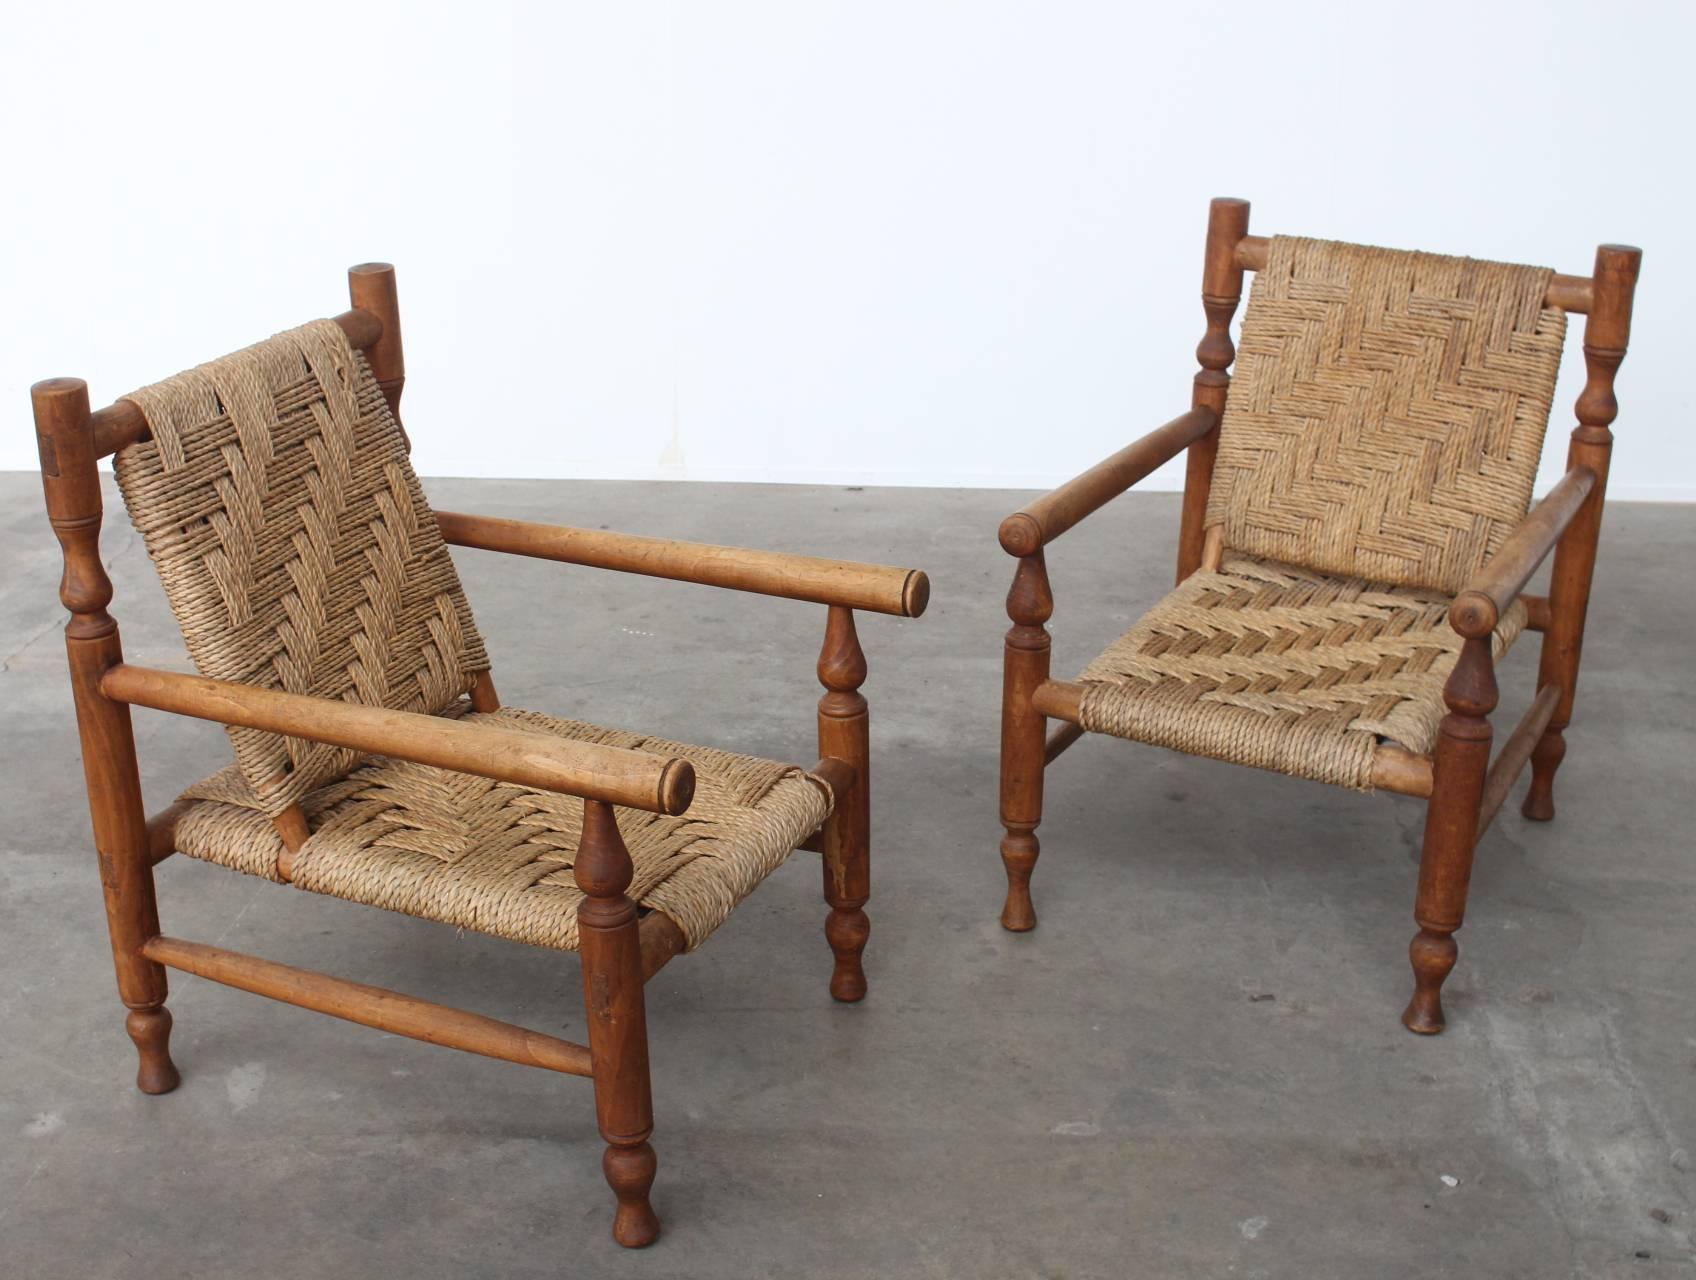 Pair of French lounge chairs in the style of Charlotte Perriand. The frame of the chairs is made of ash wood and the seat and backrest are of woven sisal. The chairs have a wonderful craftsmanship structure and are beautifully patinated. They are